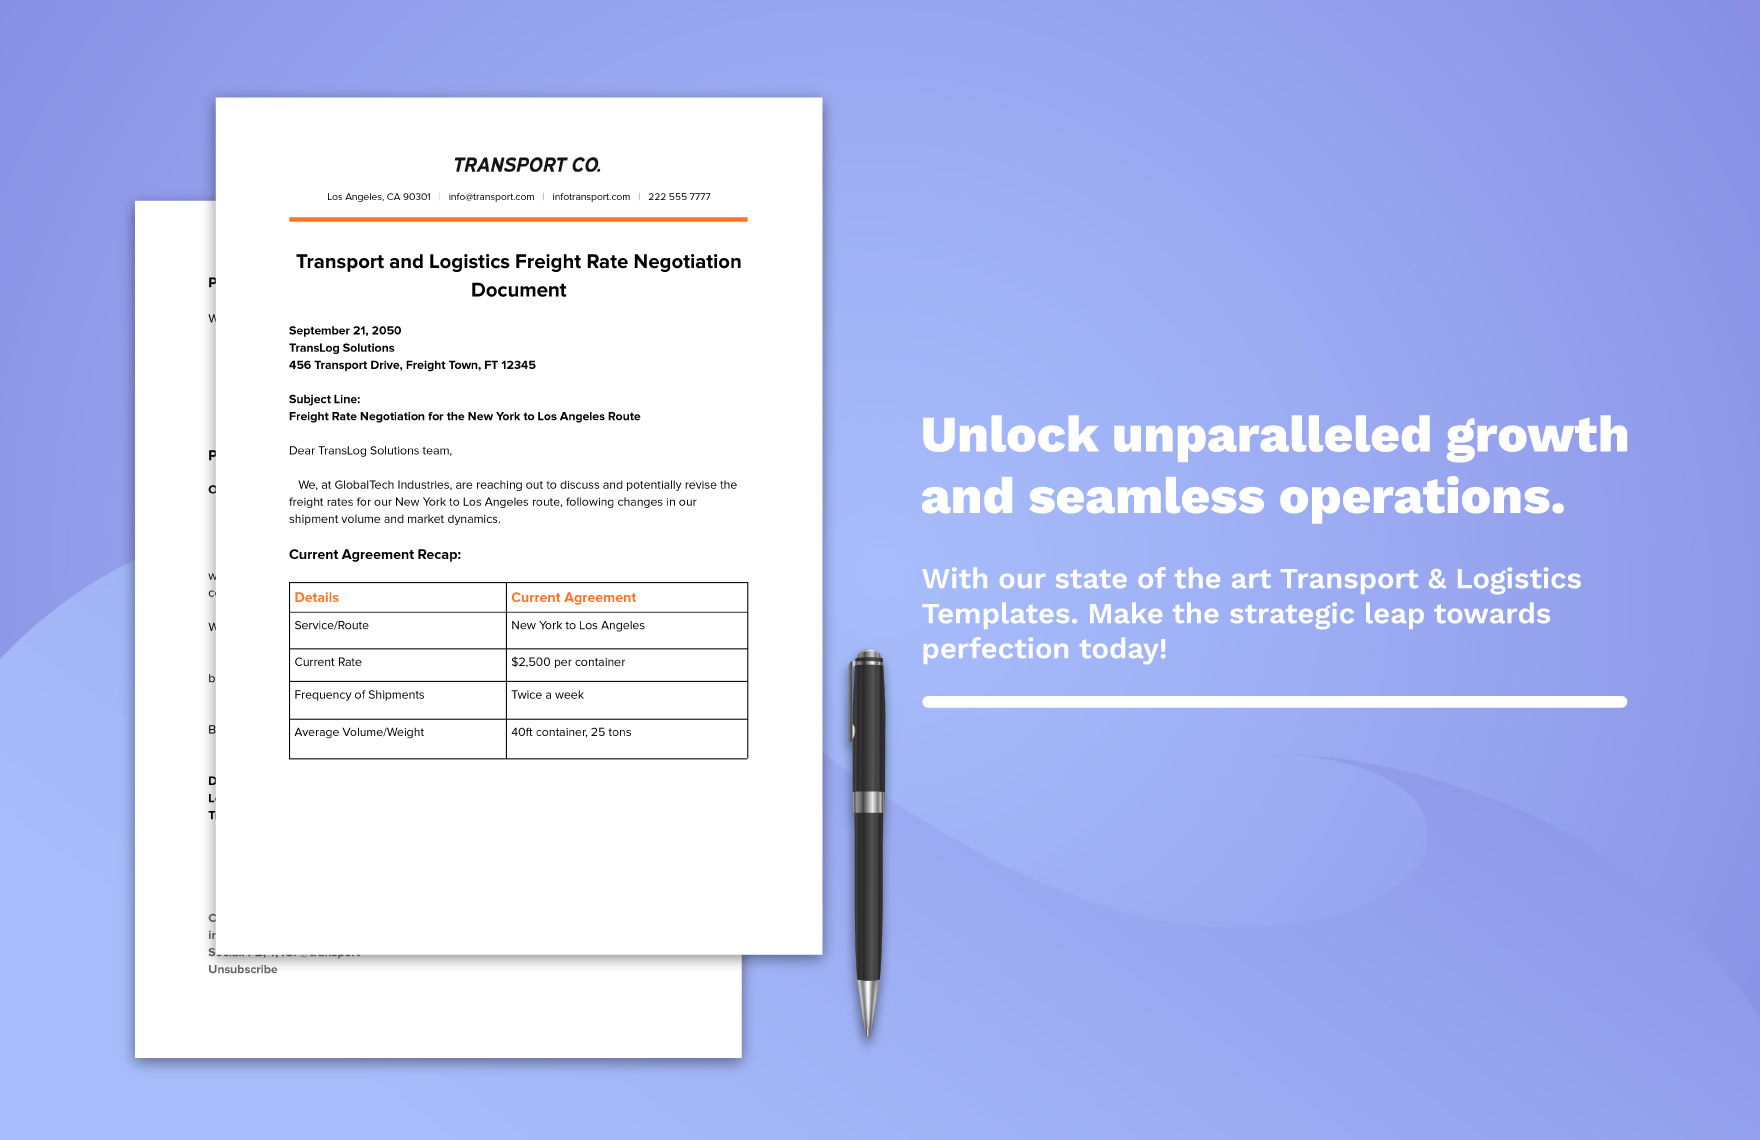 Transport and Logistics Freight Rate Negotiation Document Template